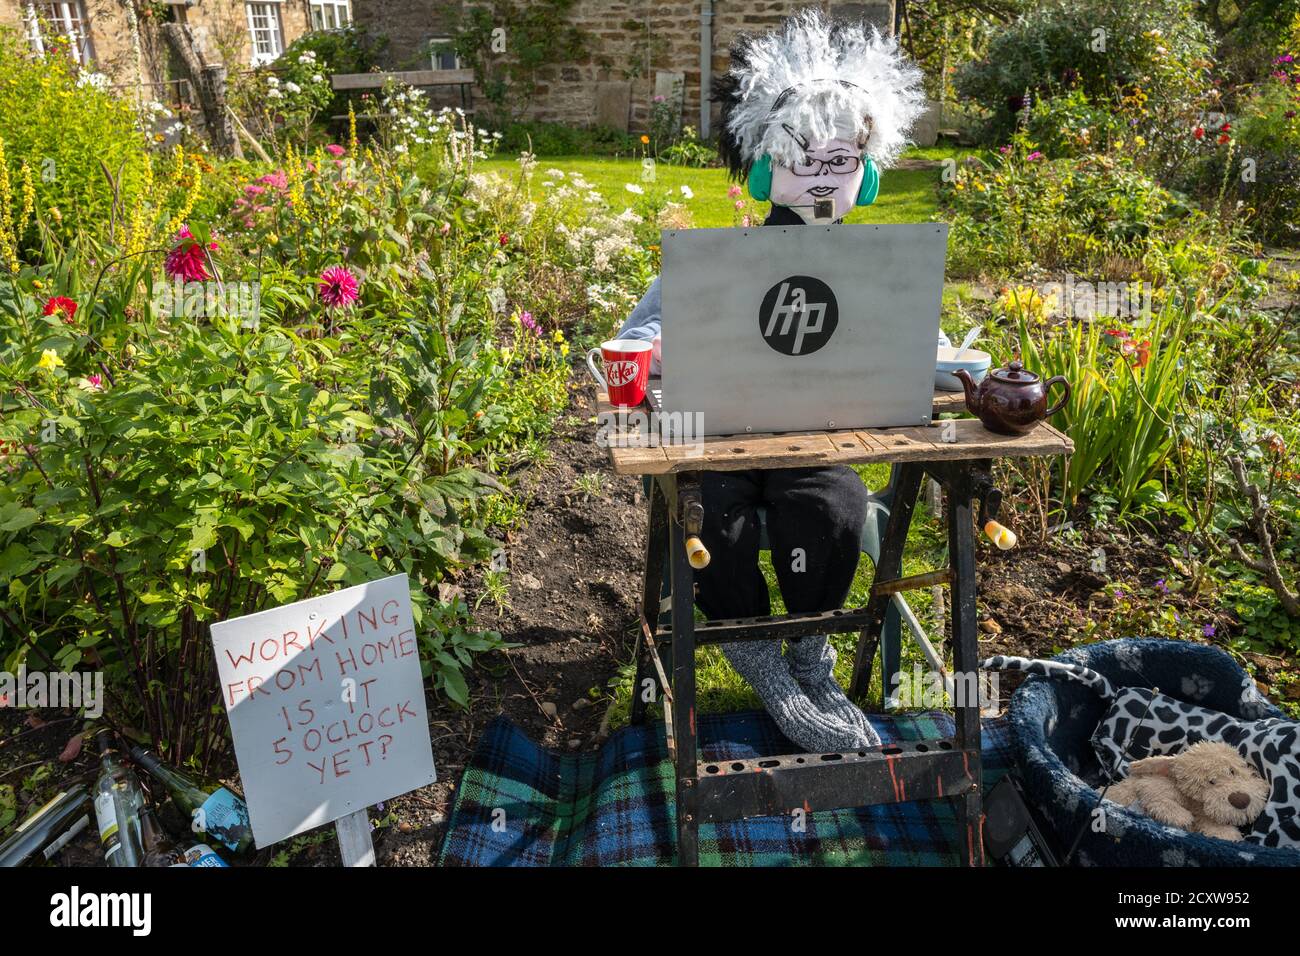 This years theme for the Yorkshire Dales village of Redmire annual scarecrow competition being Covid 19 and the Lockdown. Stock Photo